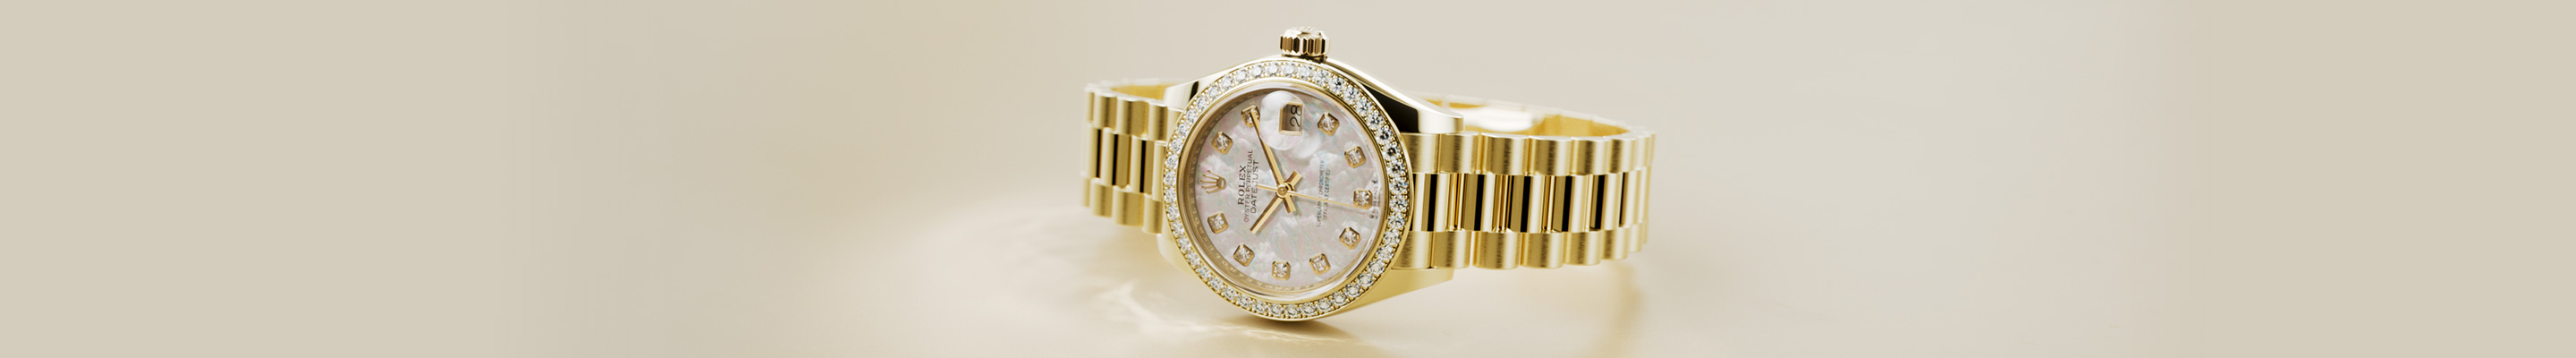 Rolex: The Lady-DateJust